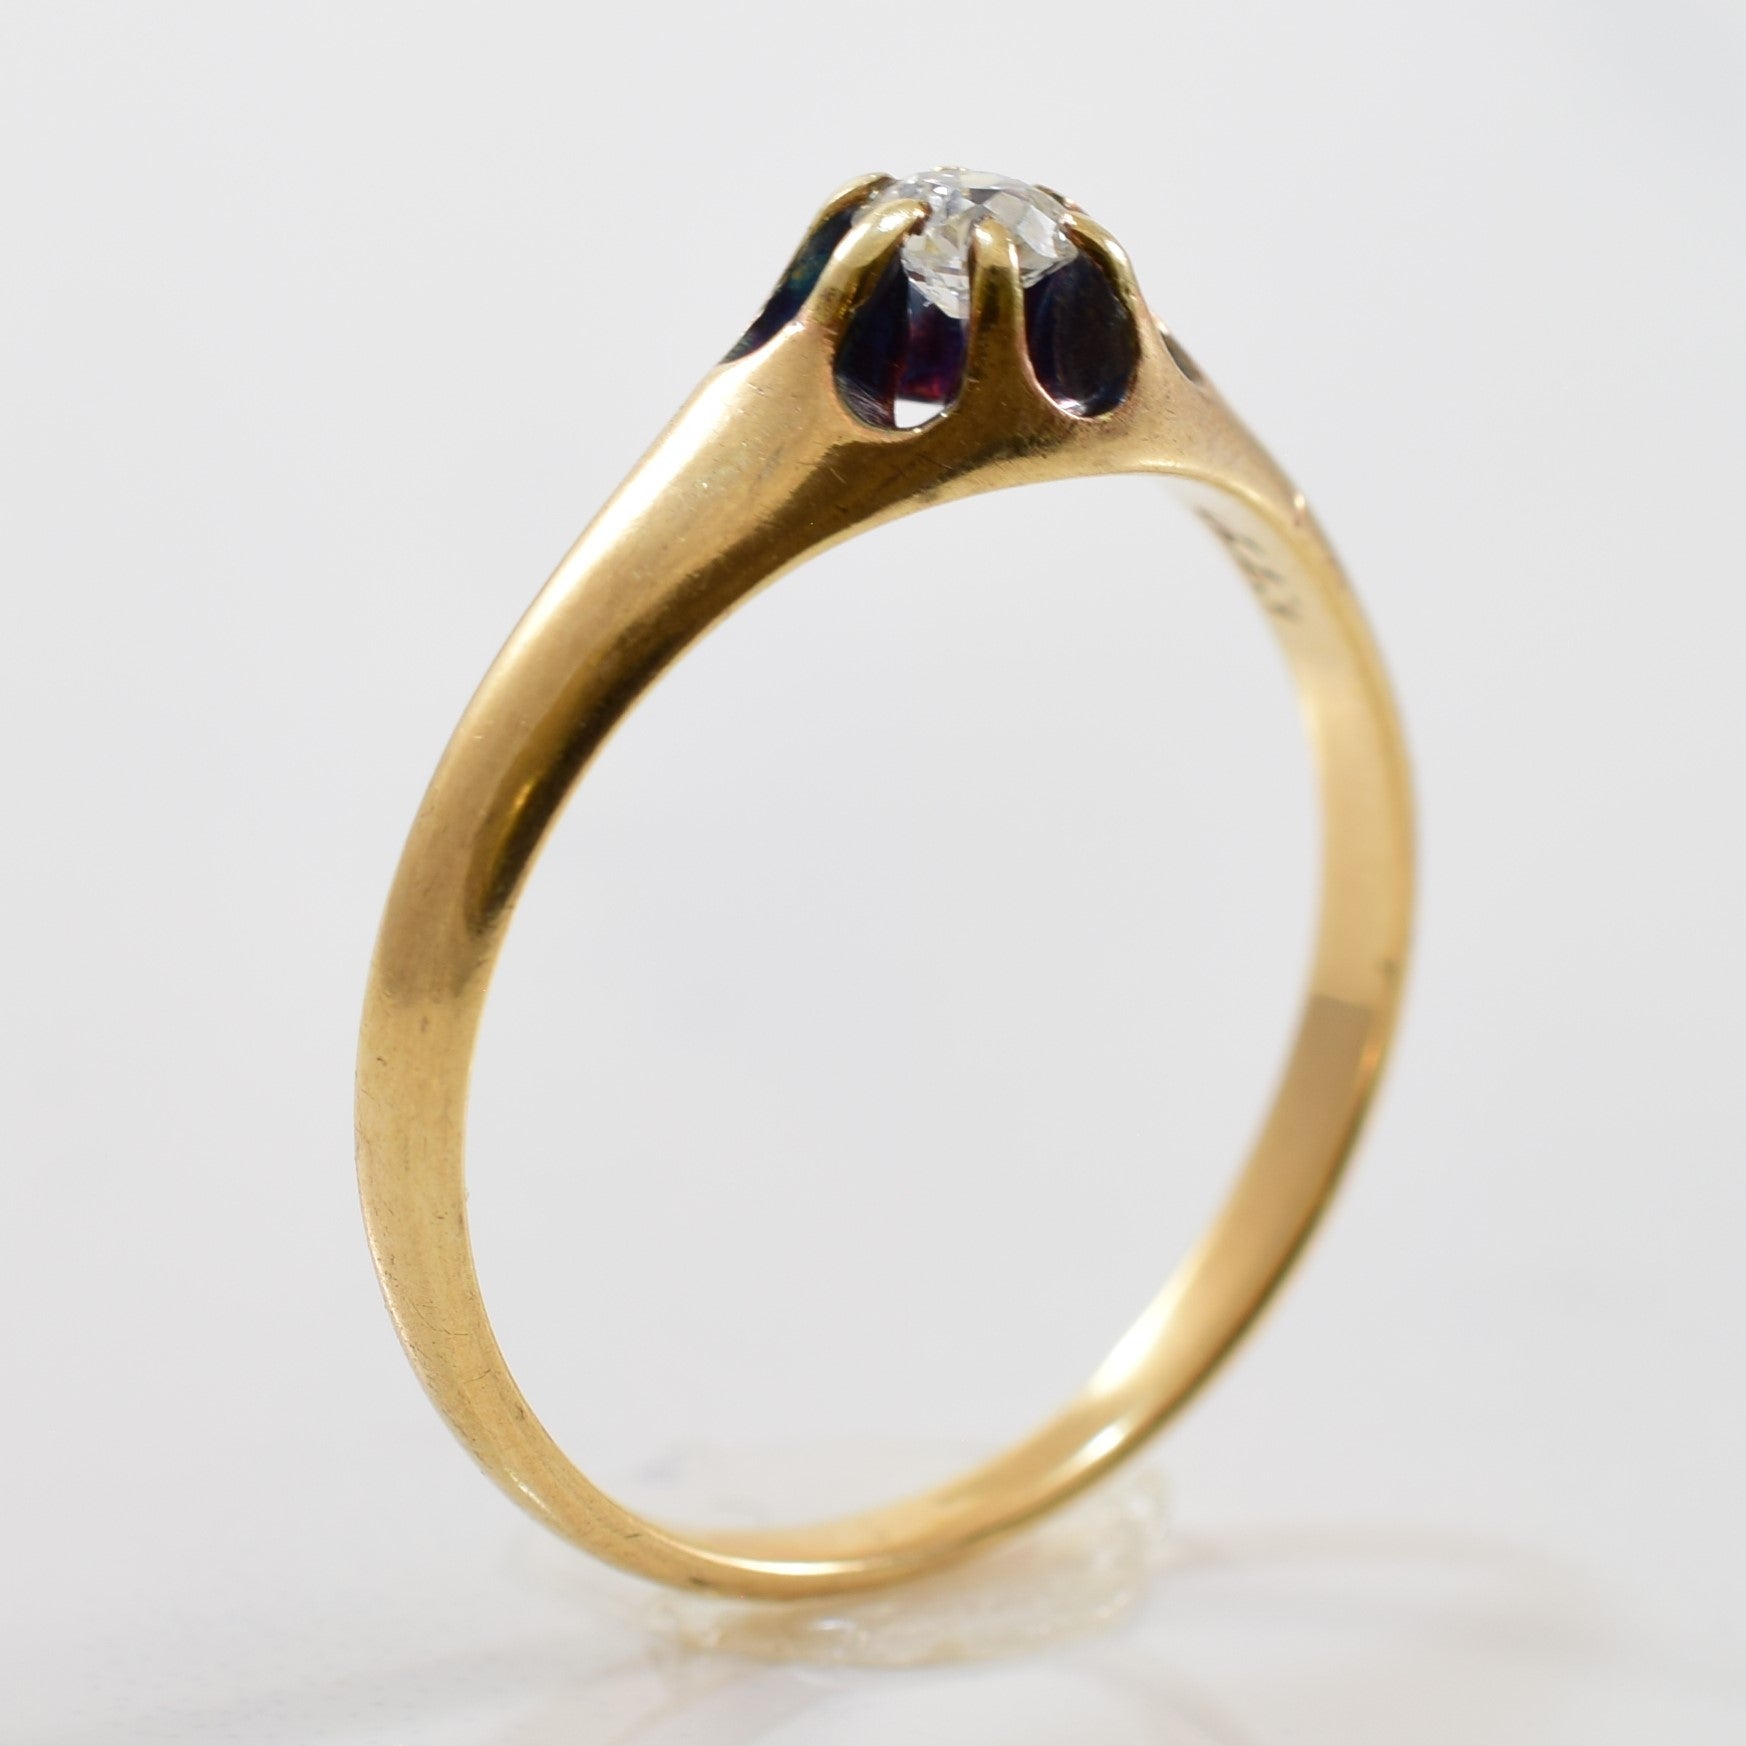 Early 1900s Diamond Solitaire Ring | 0.12ct | SZ 6 |